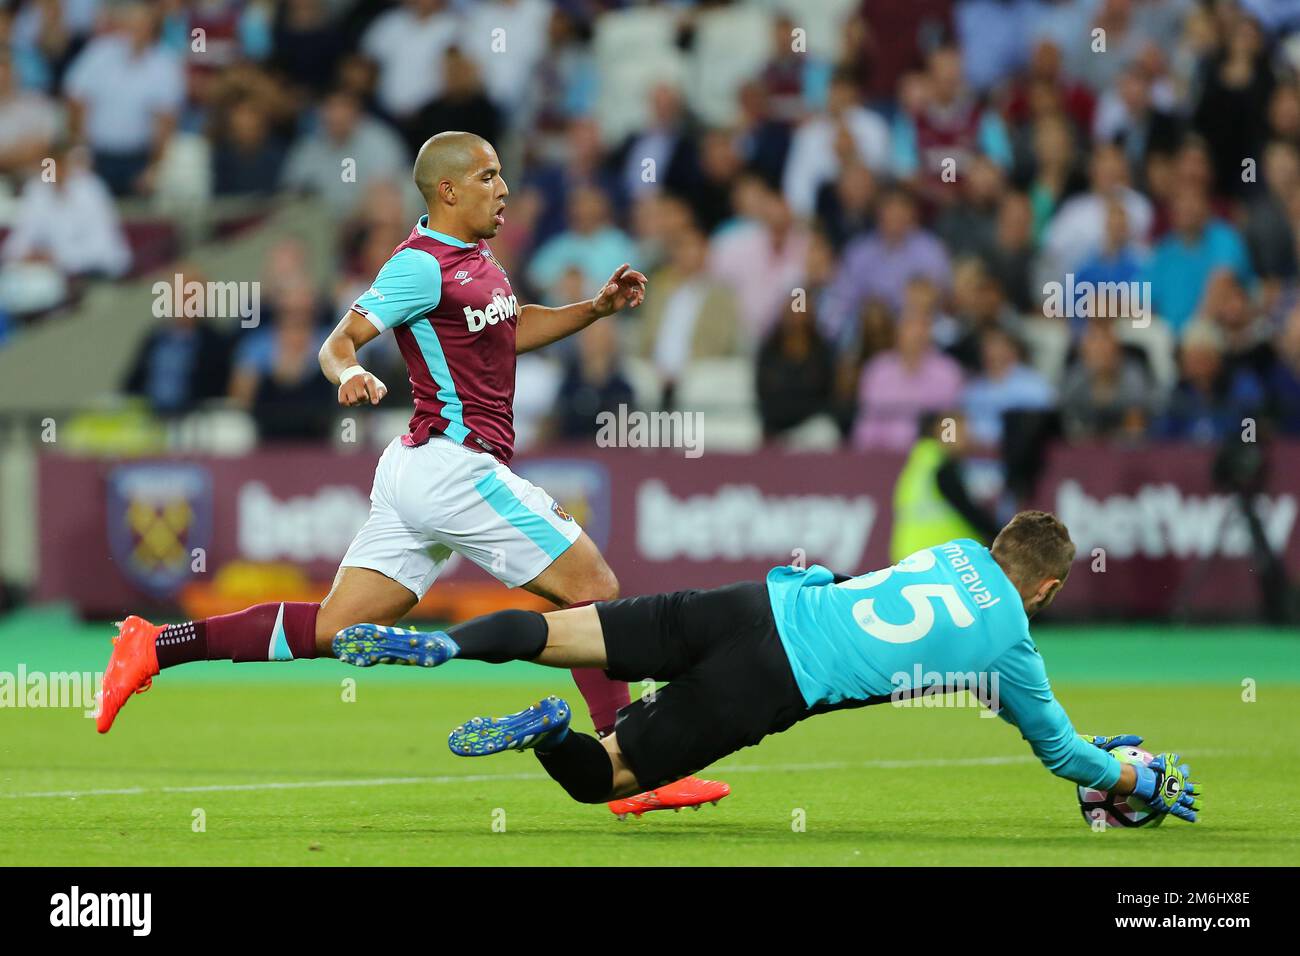 Axel Maraval of NK Domzale grabs the ball with Sofiane Feghouli of West Ham United clean through on goal - West Ham United v NK Domzale, UEFA Europa League second leg third round qualifier, The London Stadium, Stratford, London - 06 August 2016.Picture by Richard Calver Stock Photo